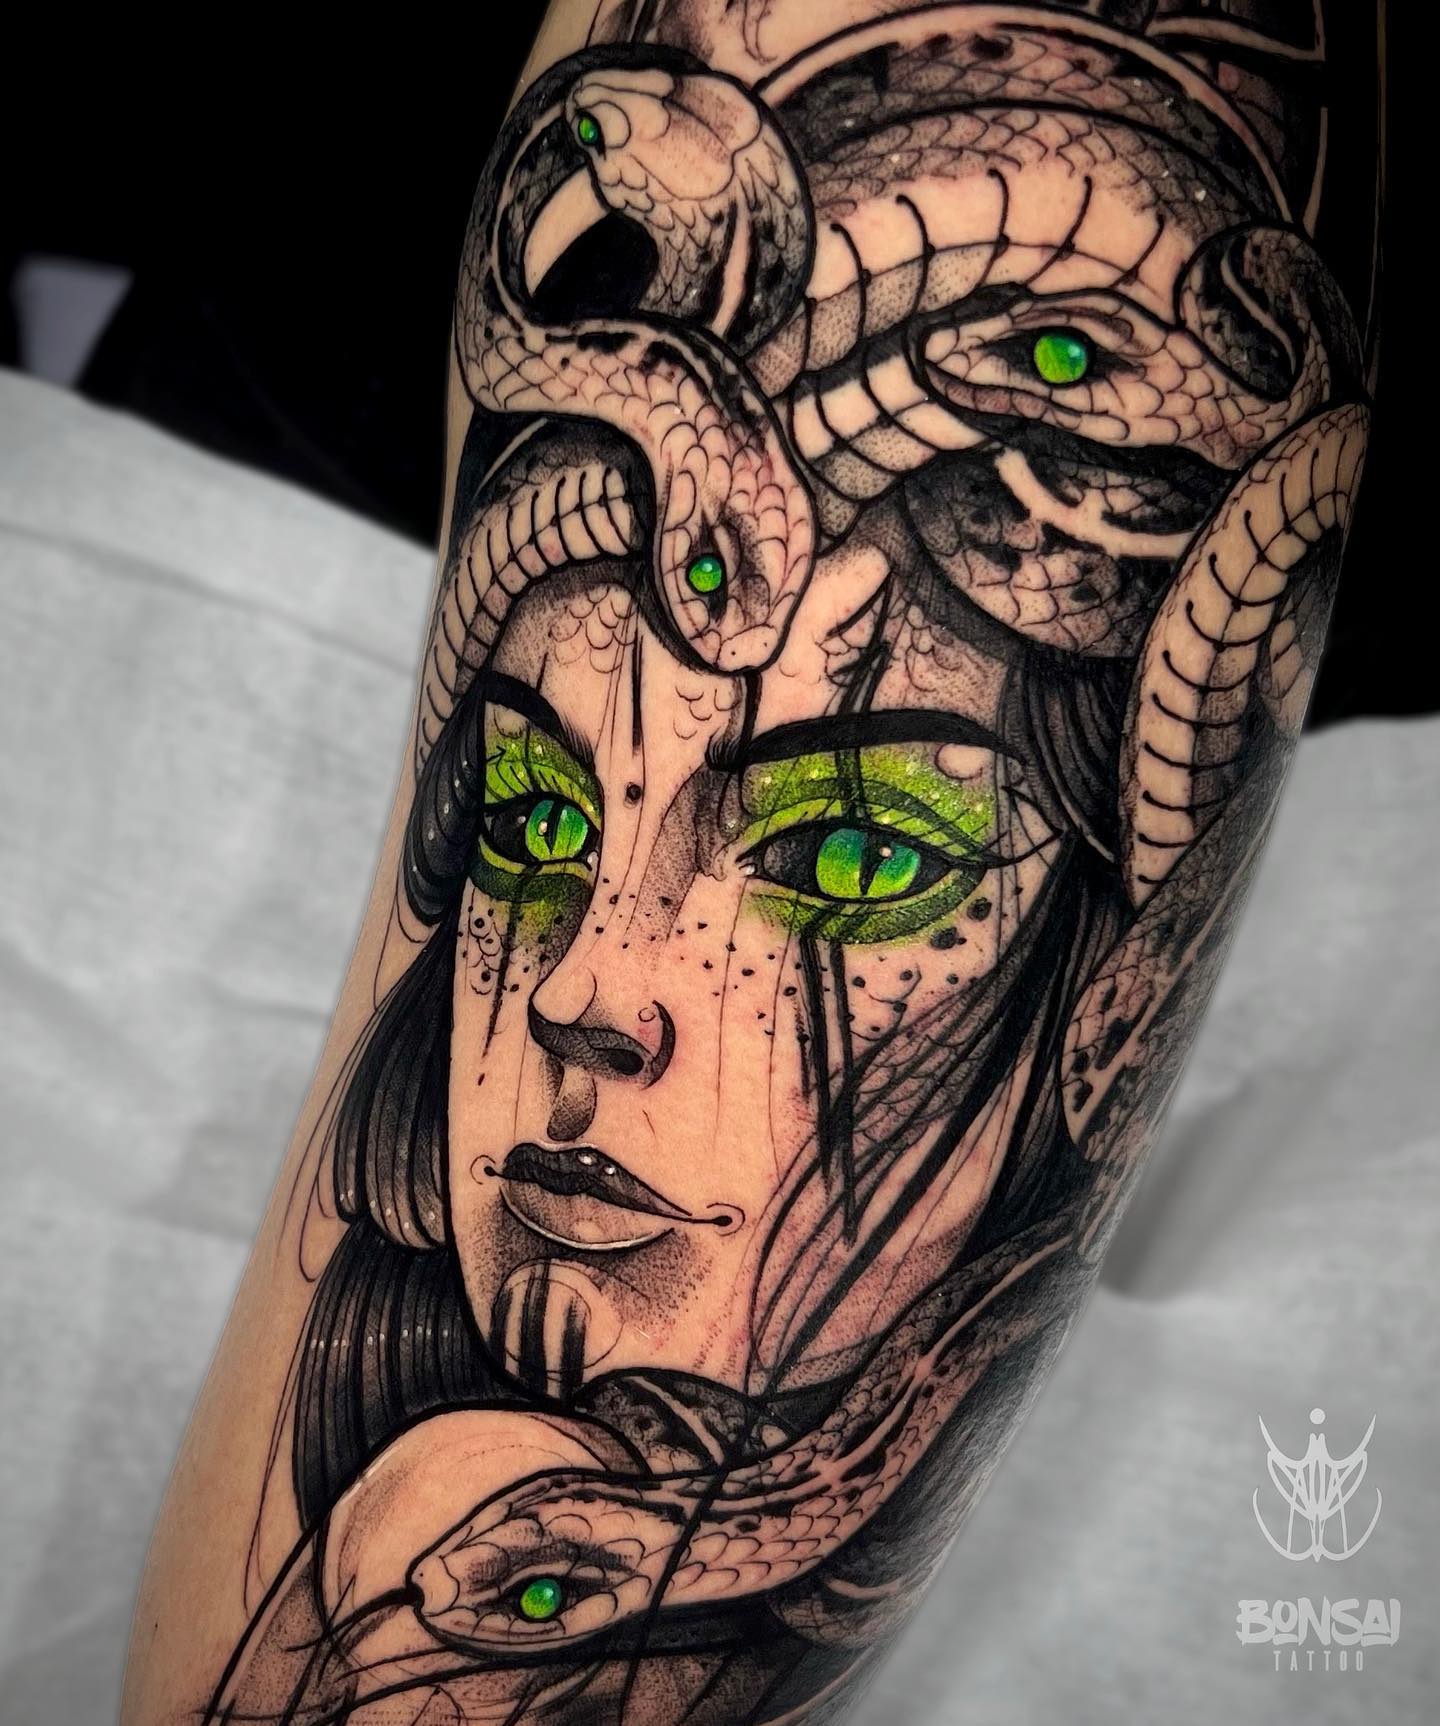 Do you know spiritual meaning of green eyes? Here it is: The green in the eyes symbolize enlightenment and connection to spirit. The snakes' and Medusa's eyes seems like they connect to each other spiritually. What are you waiting for to get this fabulous tattoo?